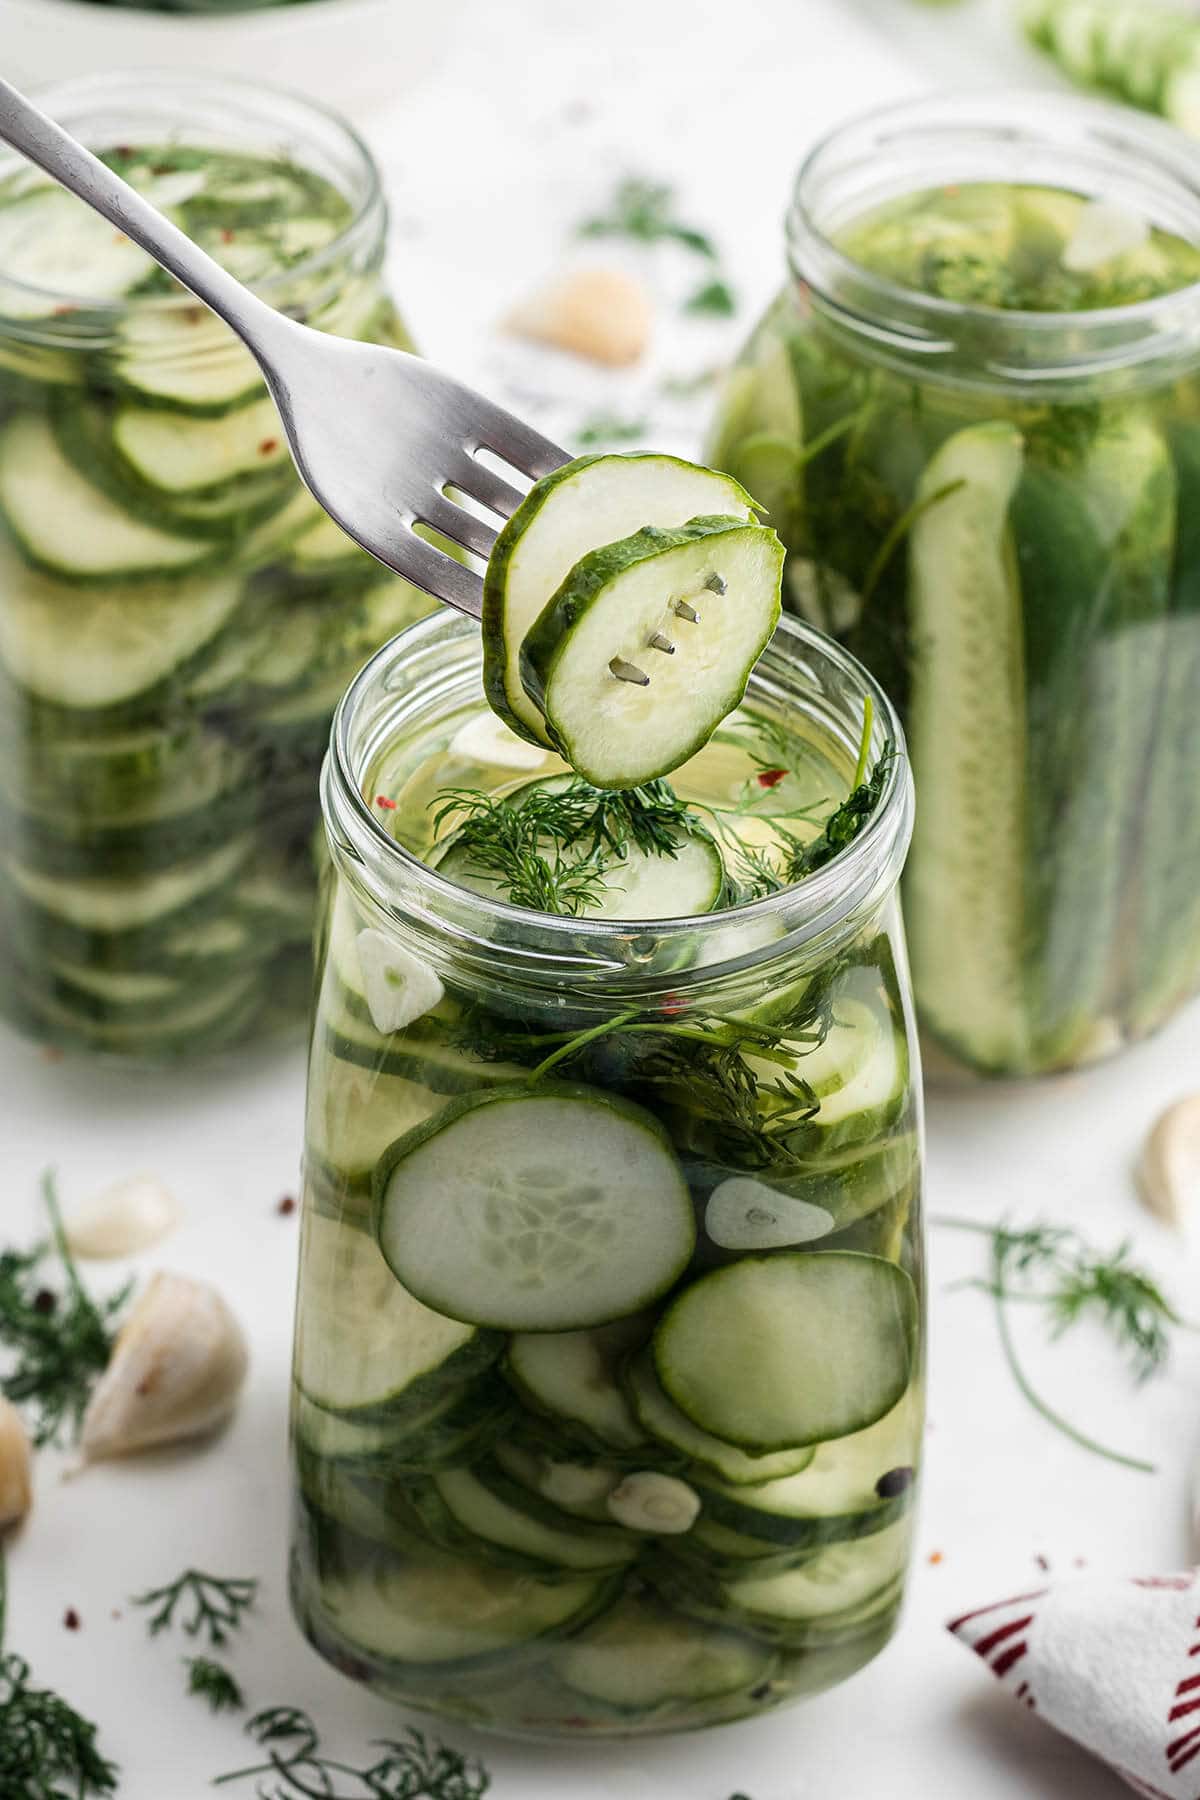 Jars of refrigerator dill pickles with fork stabbing two sliced pickles.